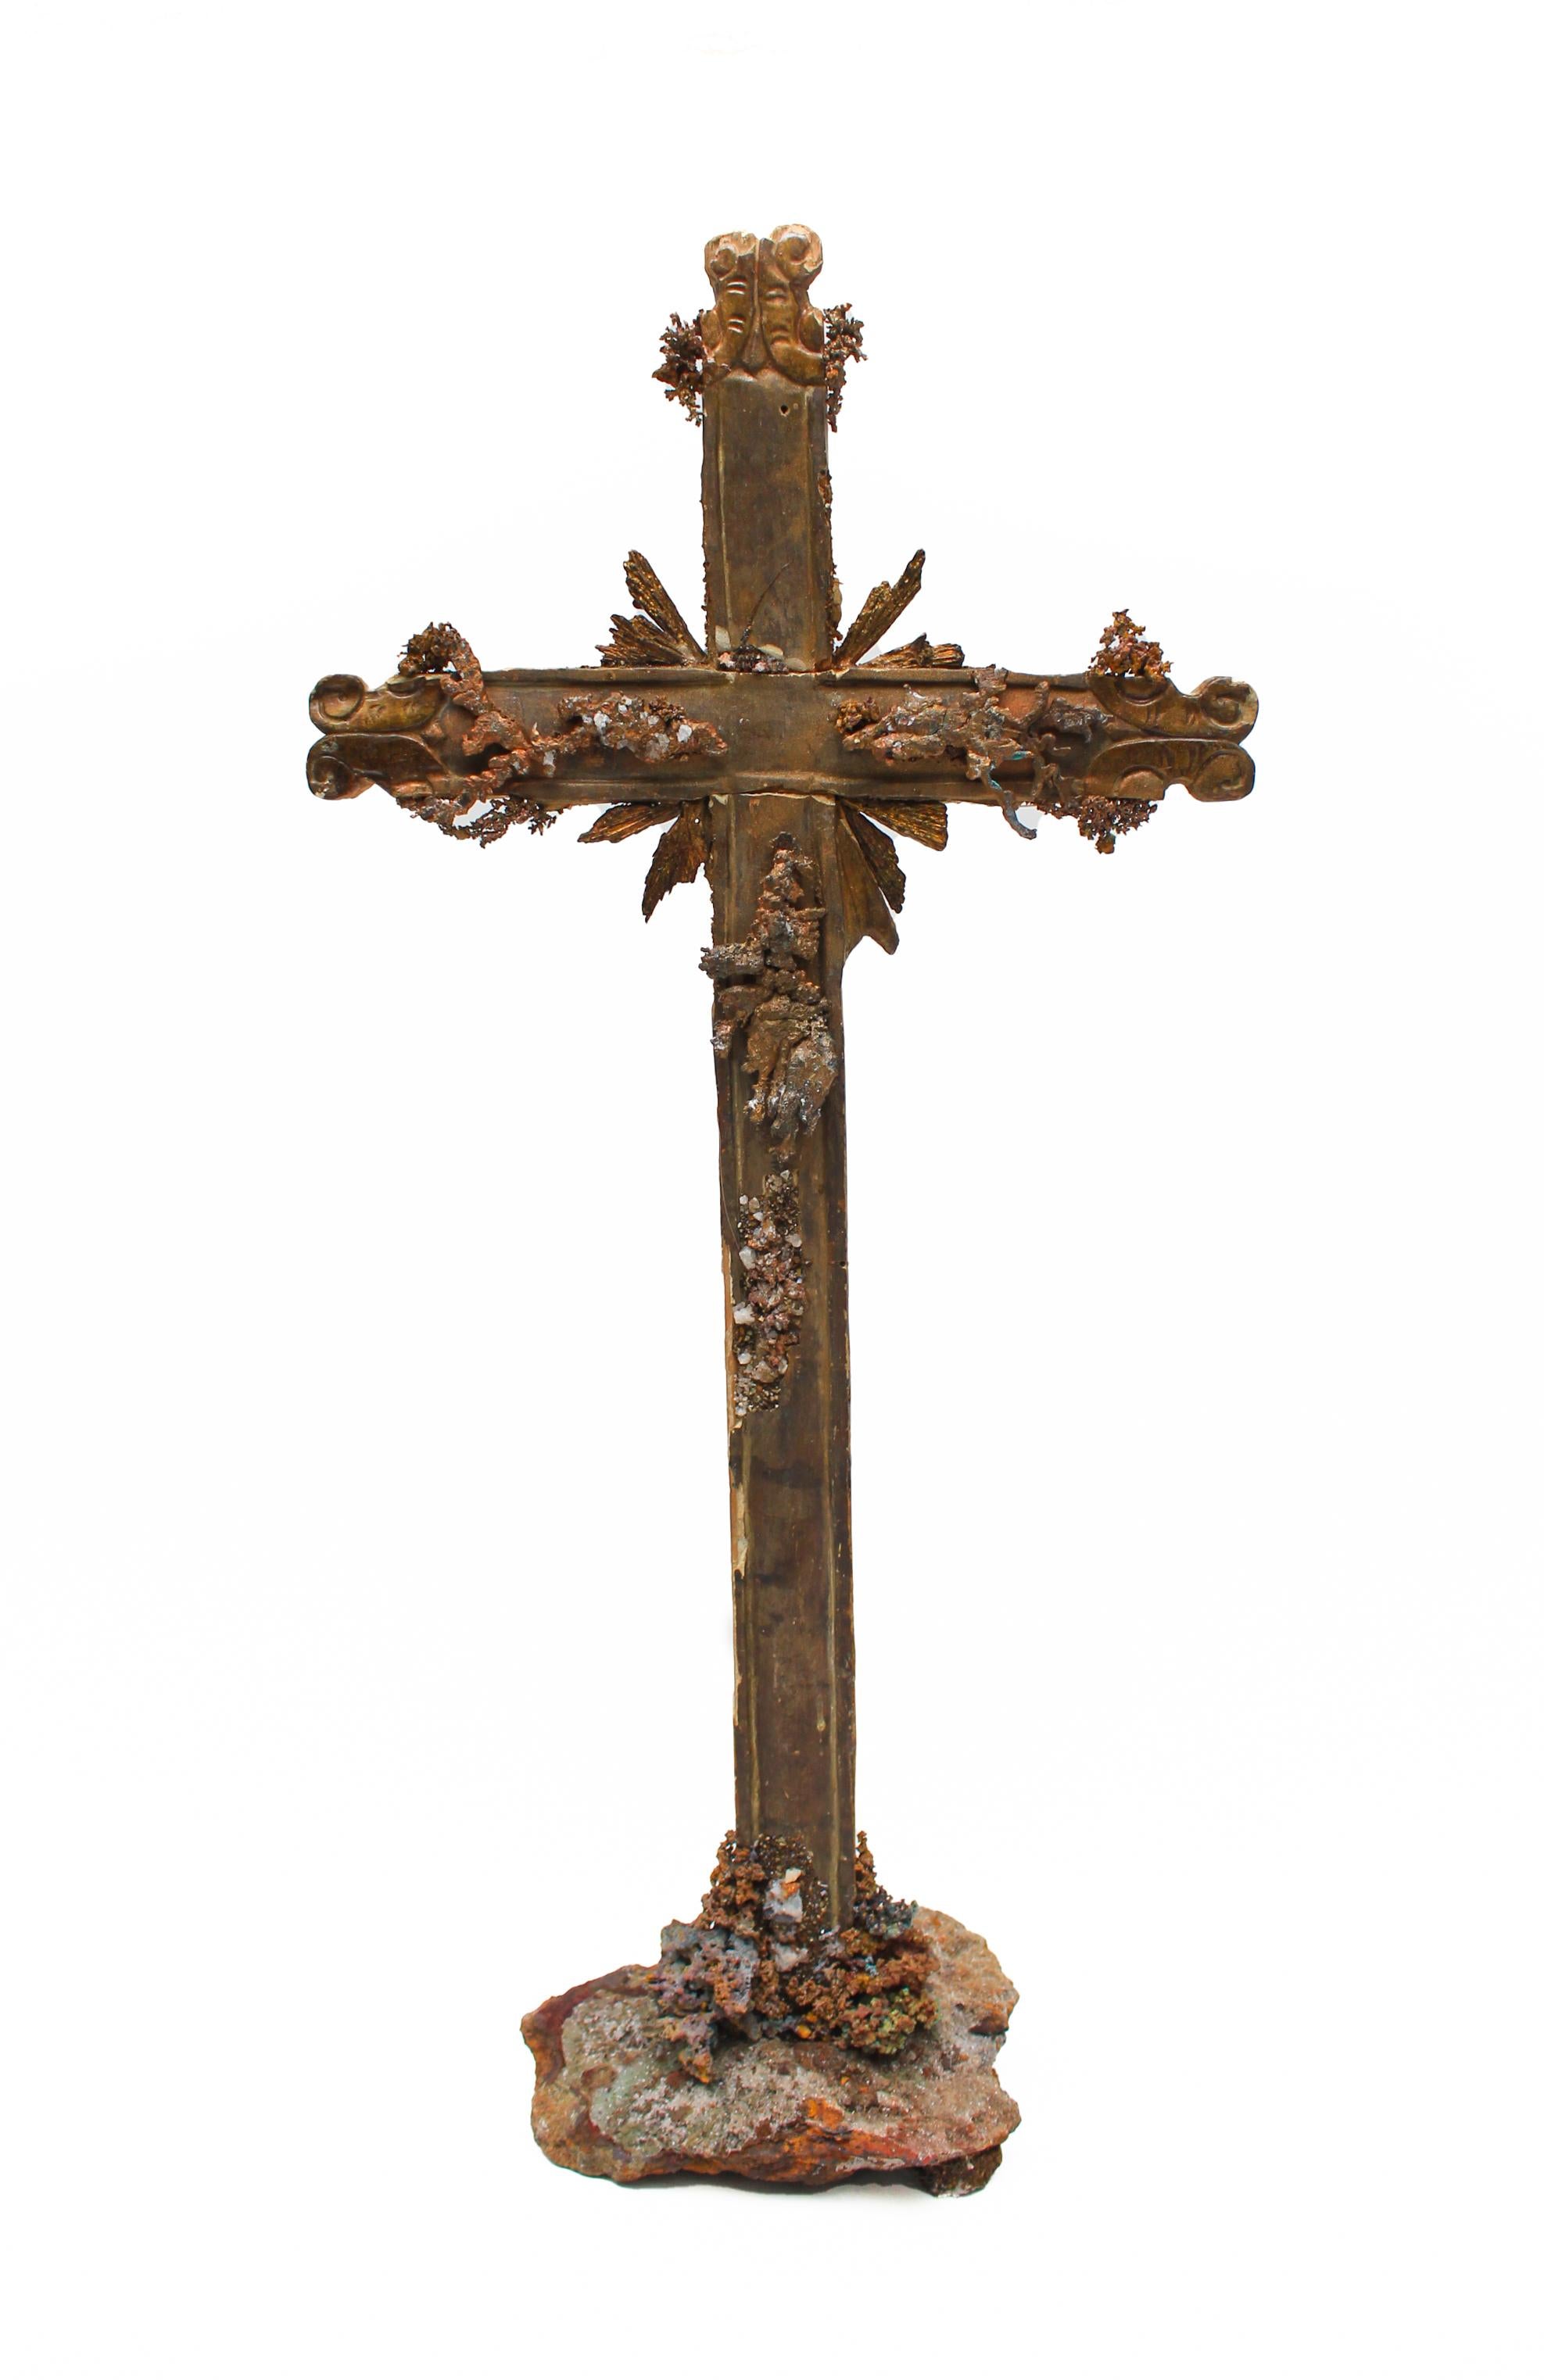 18th Century Italian cross adorned with native copper with crystals from White Pine Mine, Michigan and copper-plated kyanite on a crystal druzy in copper ore matrix base. The crucifix originally came from a church in Tuscany. 

The White Pine Mine